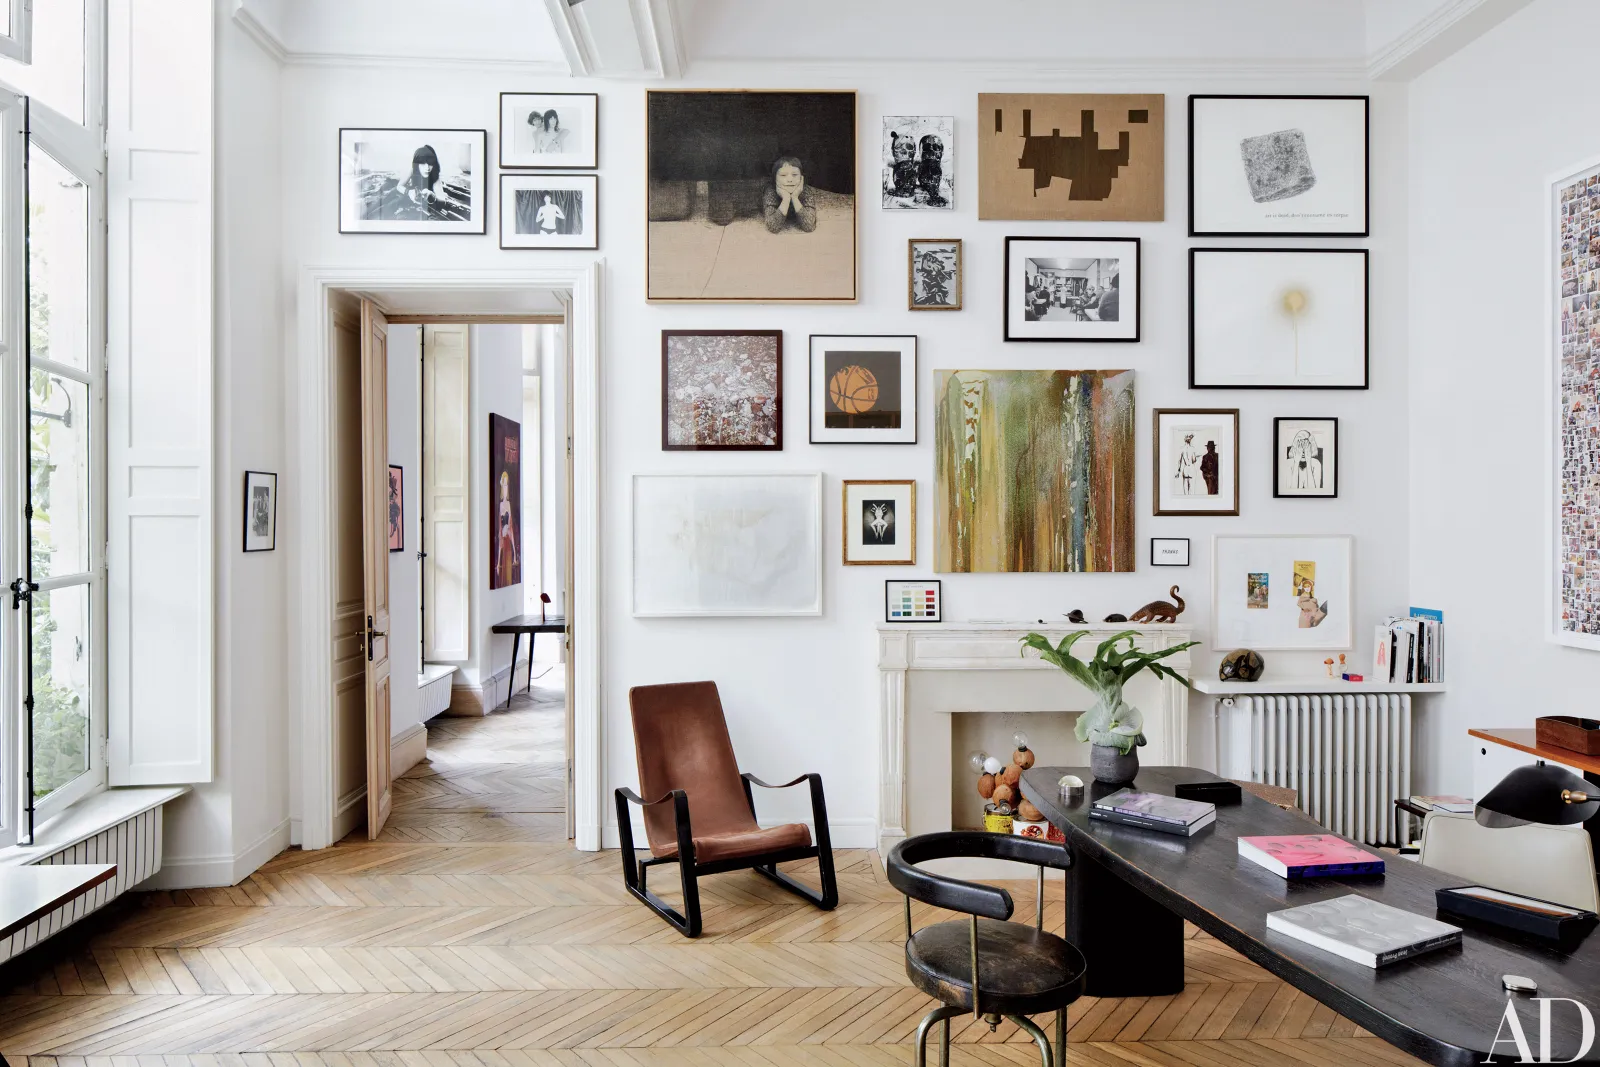 How to Decorate Walls